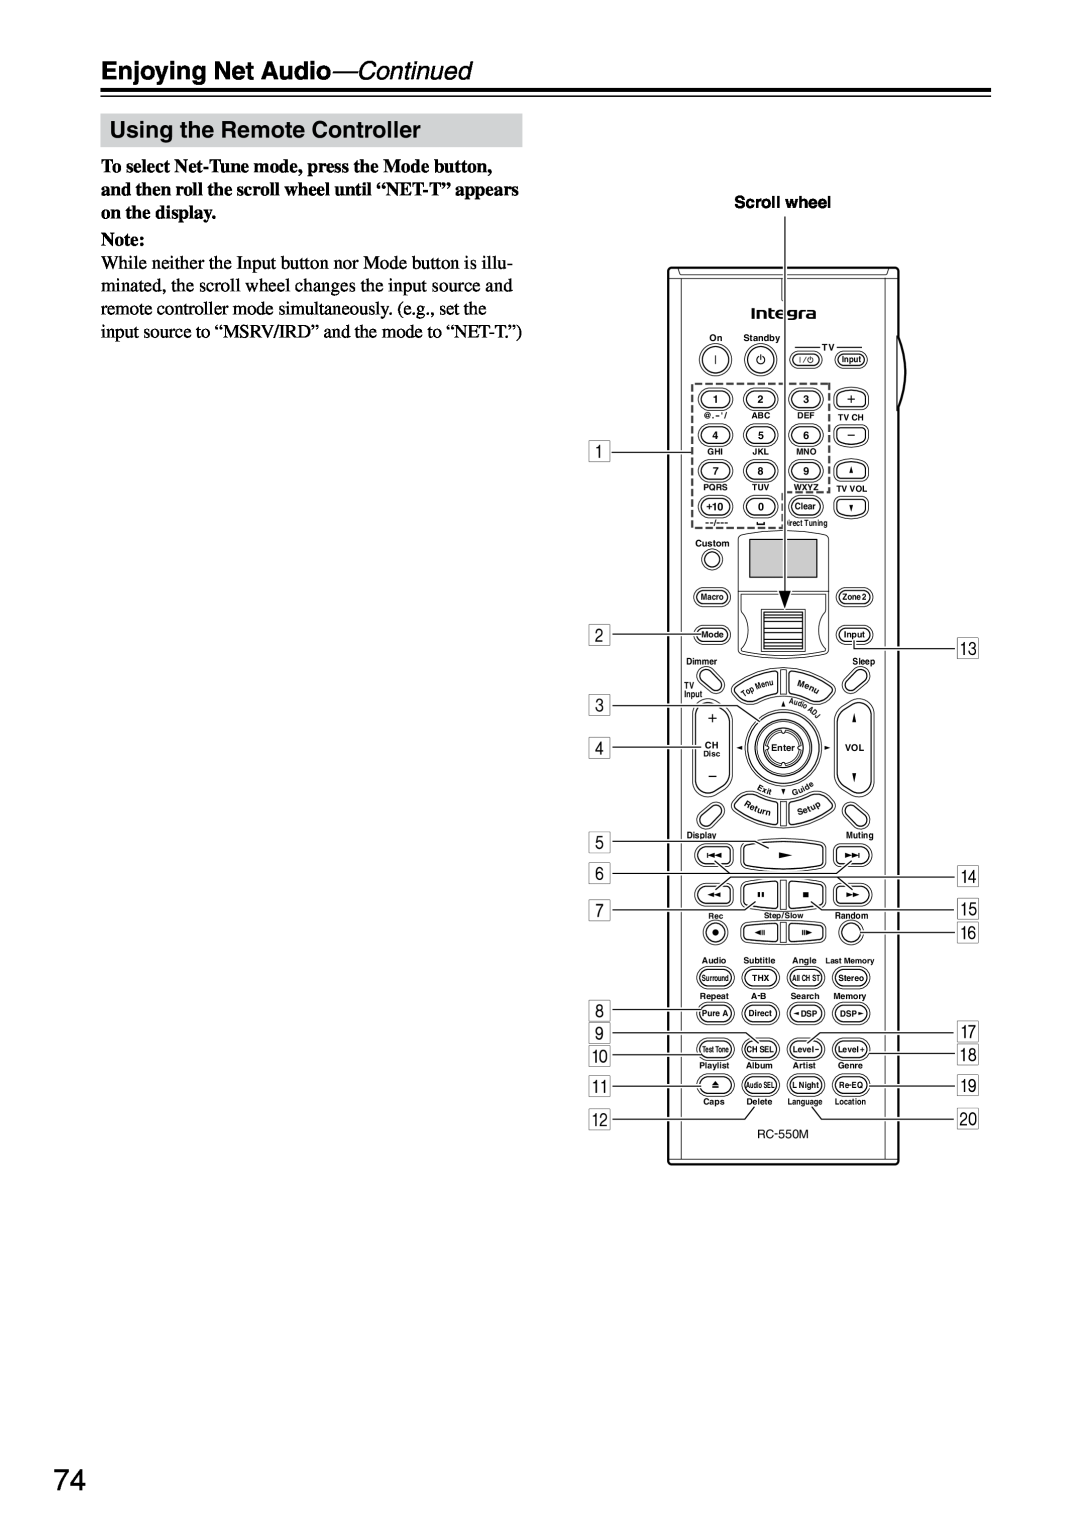 Integra DTR-7.4 instruction manual Enjoying Net Audio—Continued, Using the Remote Controller, Scroll wheel 